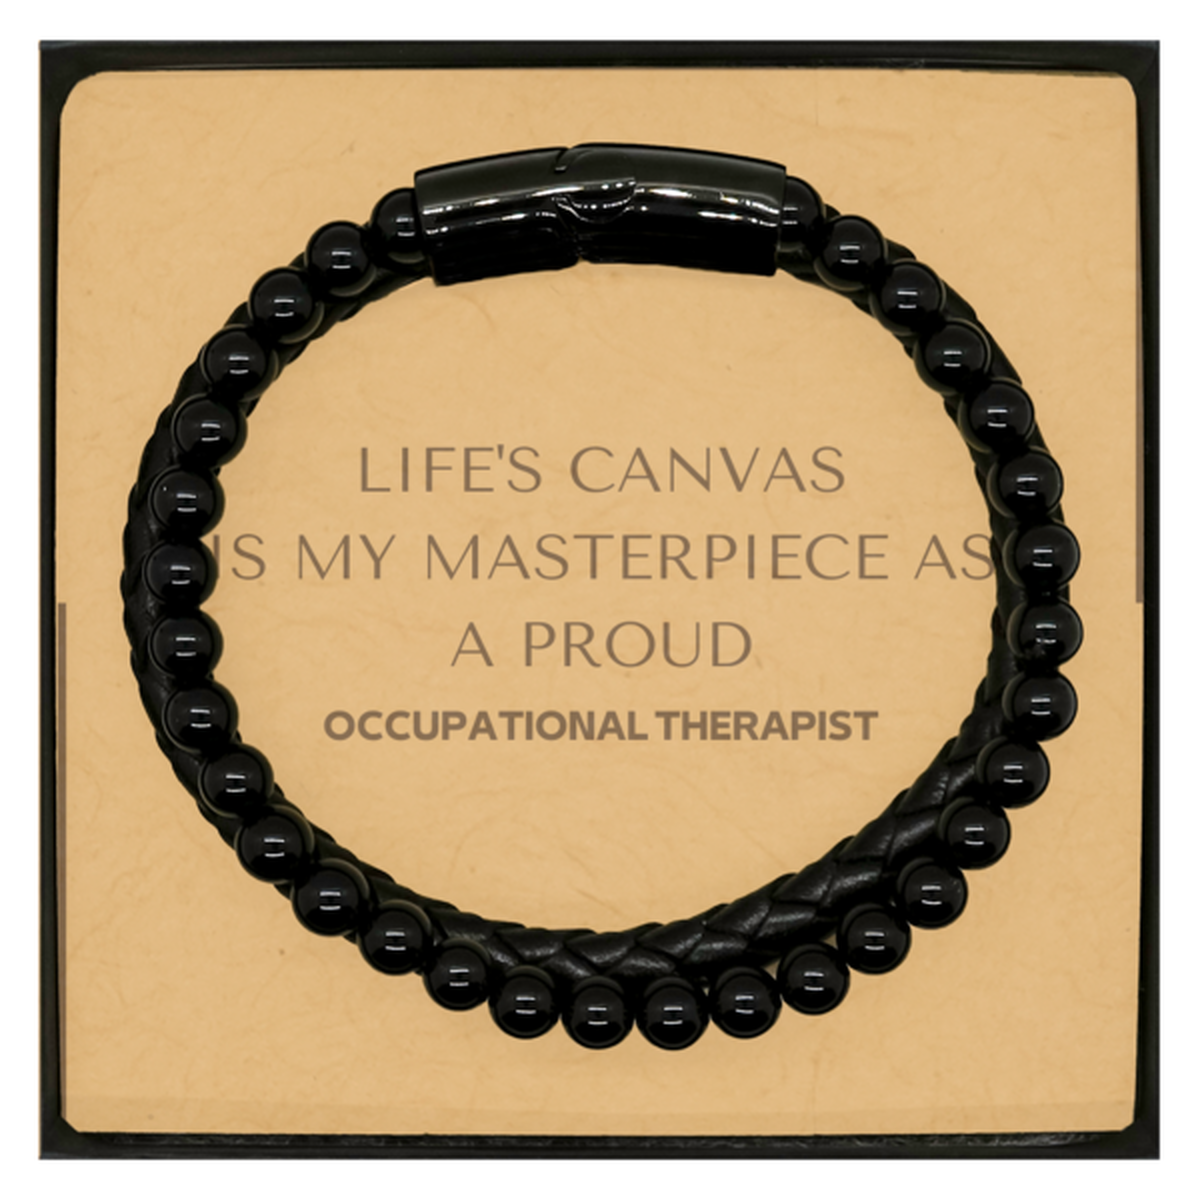 Proud Occupational Therapist Gifts, Life's canvas is my masterpiece, Epic Birthday Christmas Unique Stone Leather Bracelets For Occupational Therapist, Coworkers, Men, Women, Friends